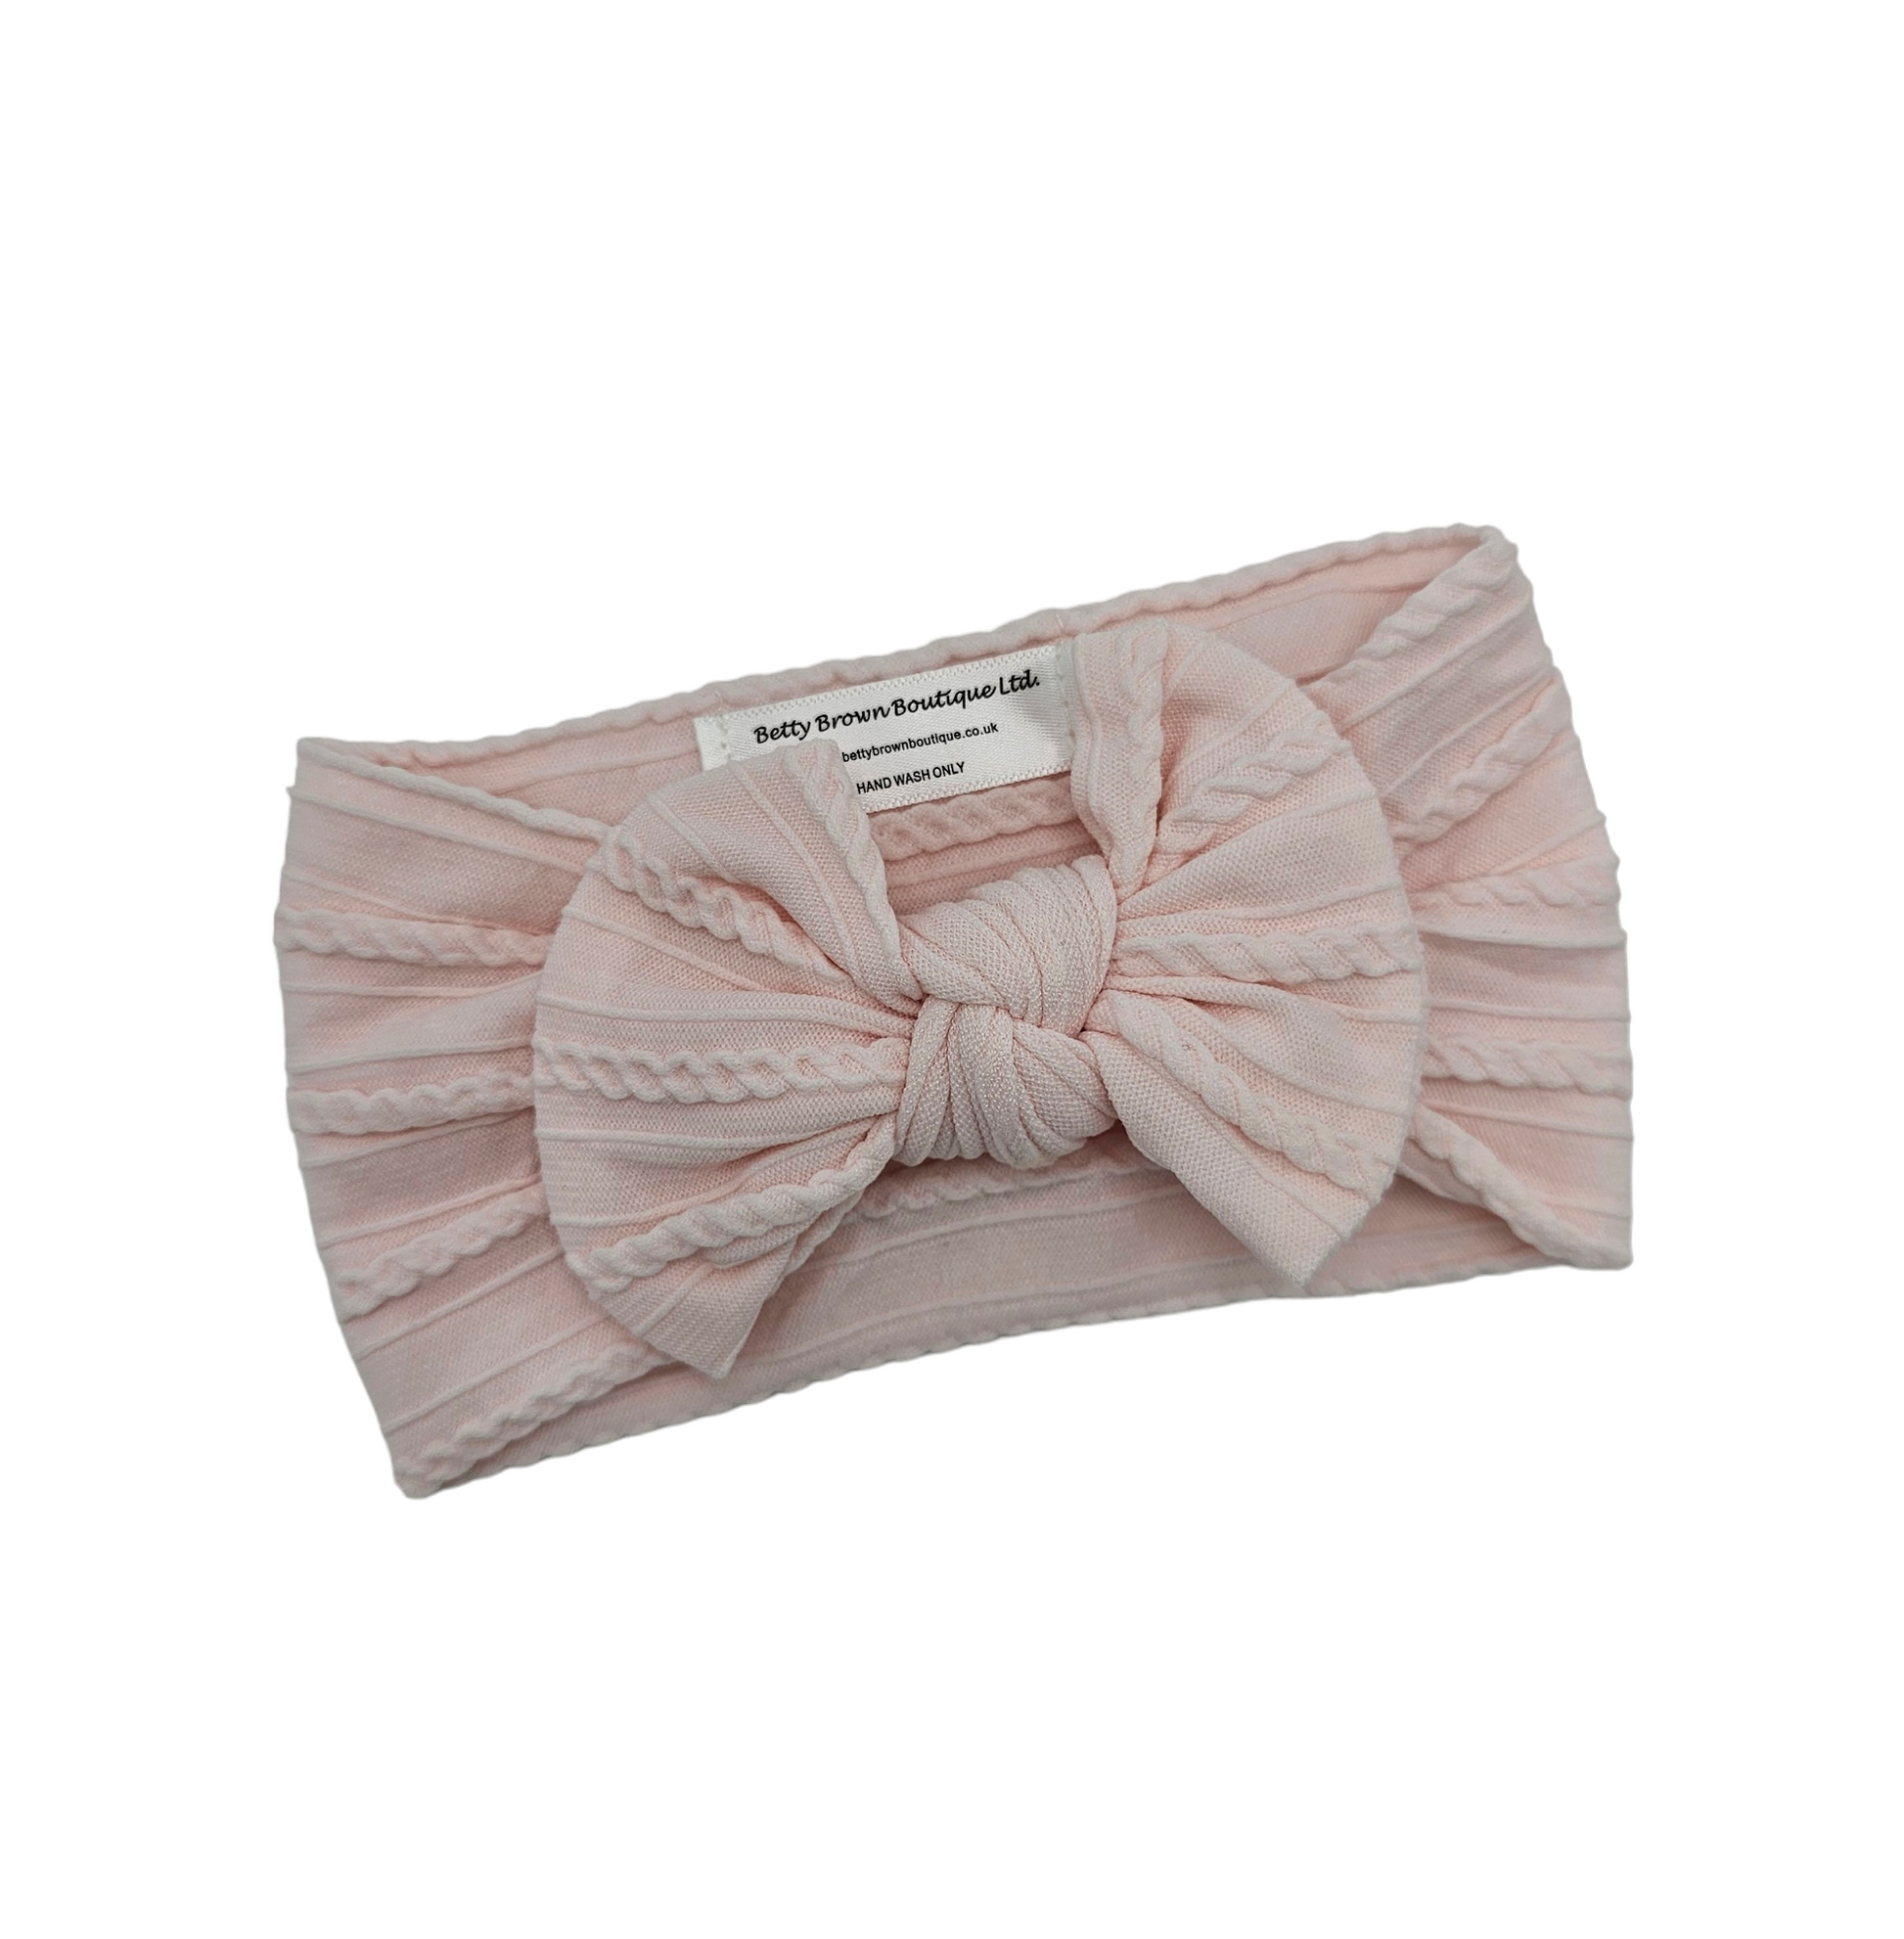 Marshmallow Pink Smaller Bow Cable Knit Headwrap - Betty Brown Boutique Ltd